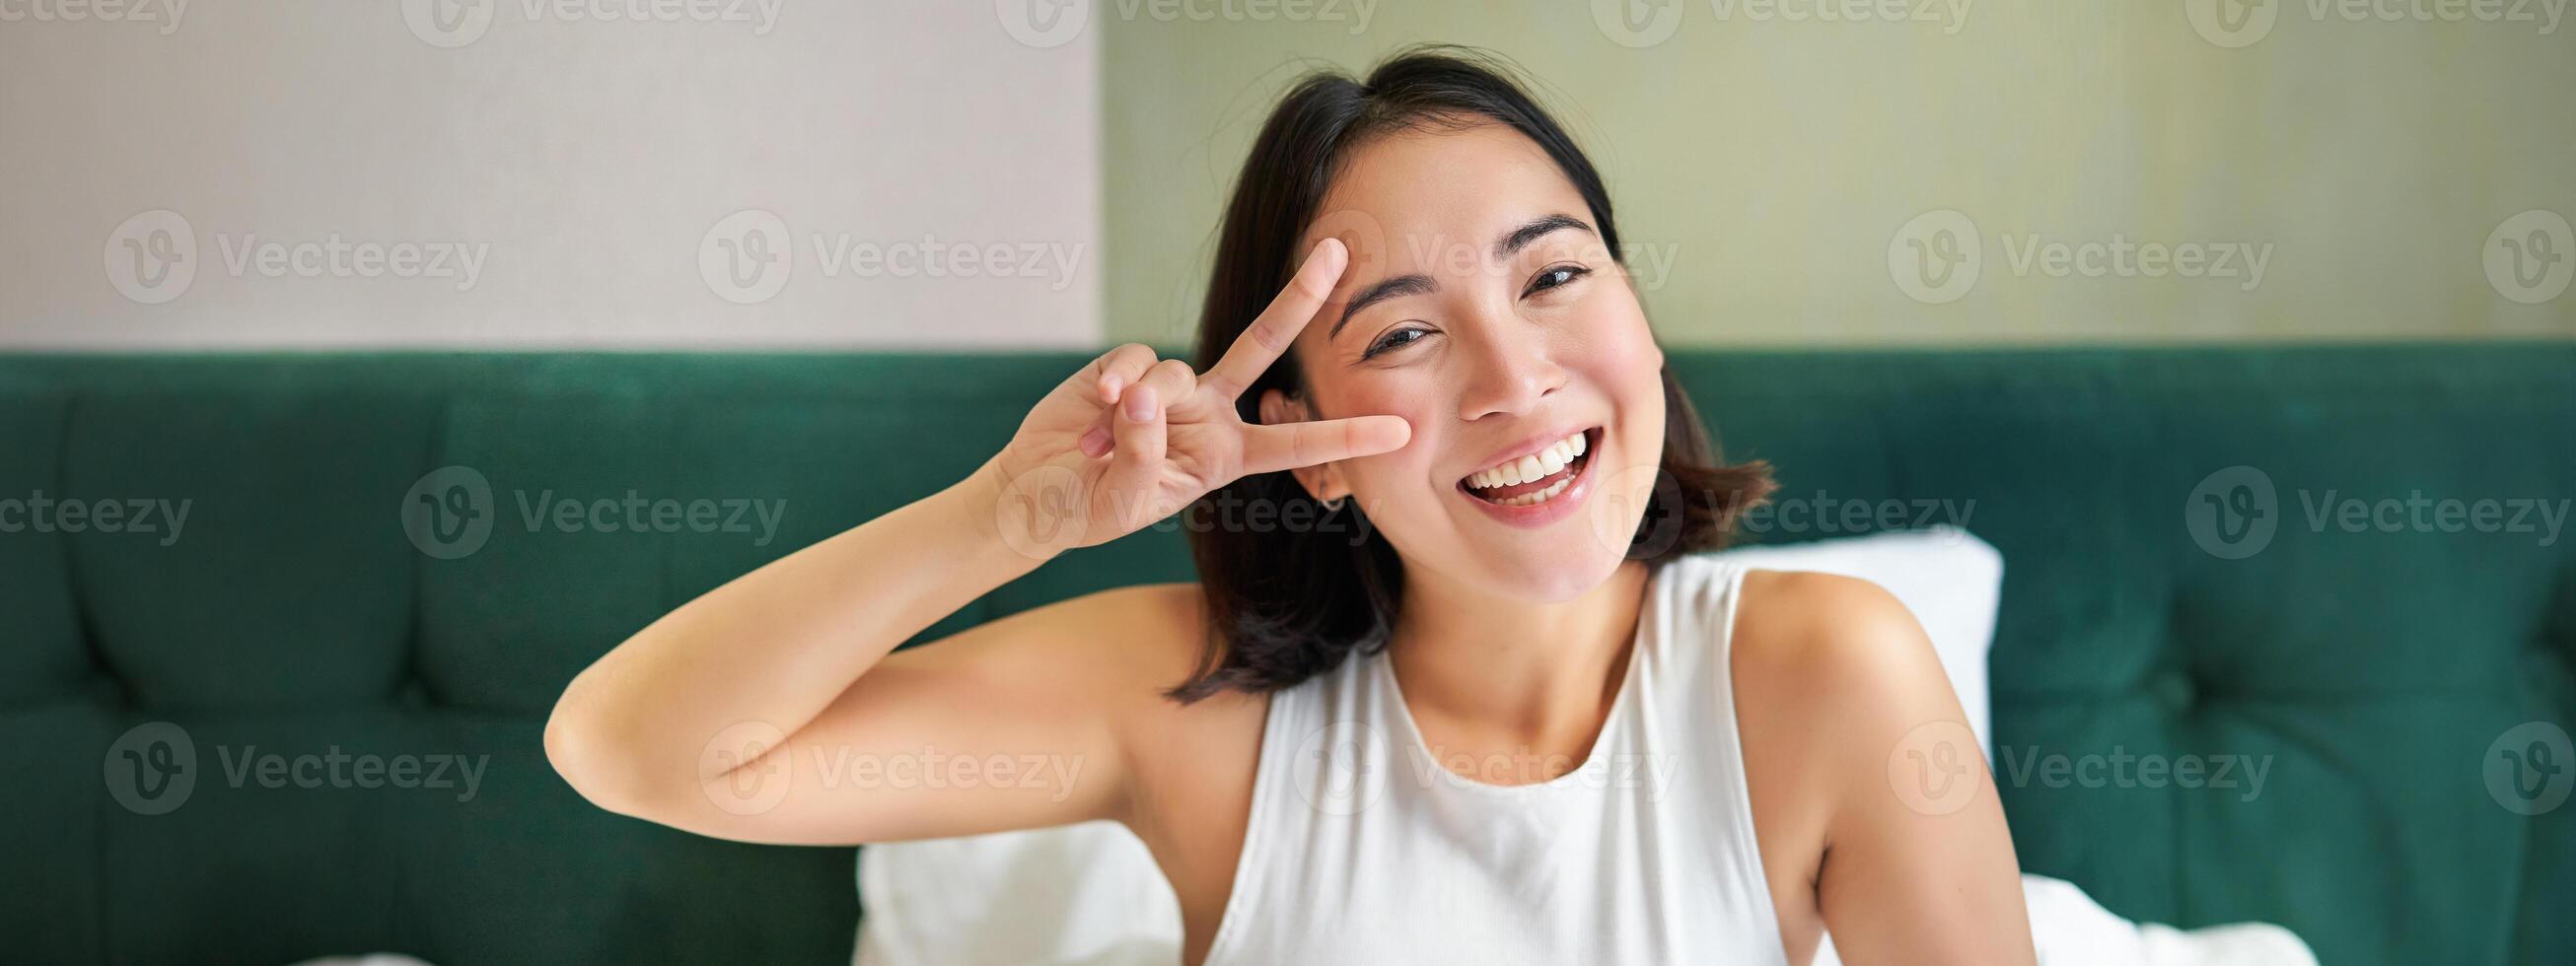 Positive asian woman lying in bed, showing peace sign, enjoys happy morning, waking up upbeat, staying in her bedroom photo